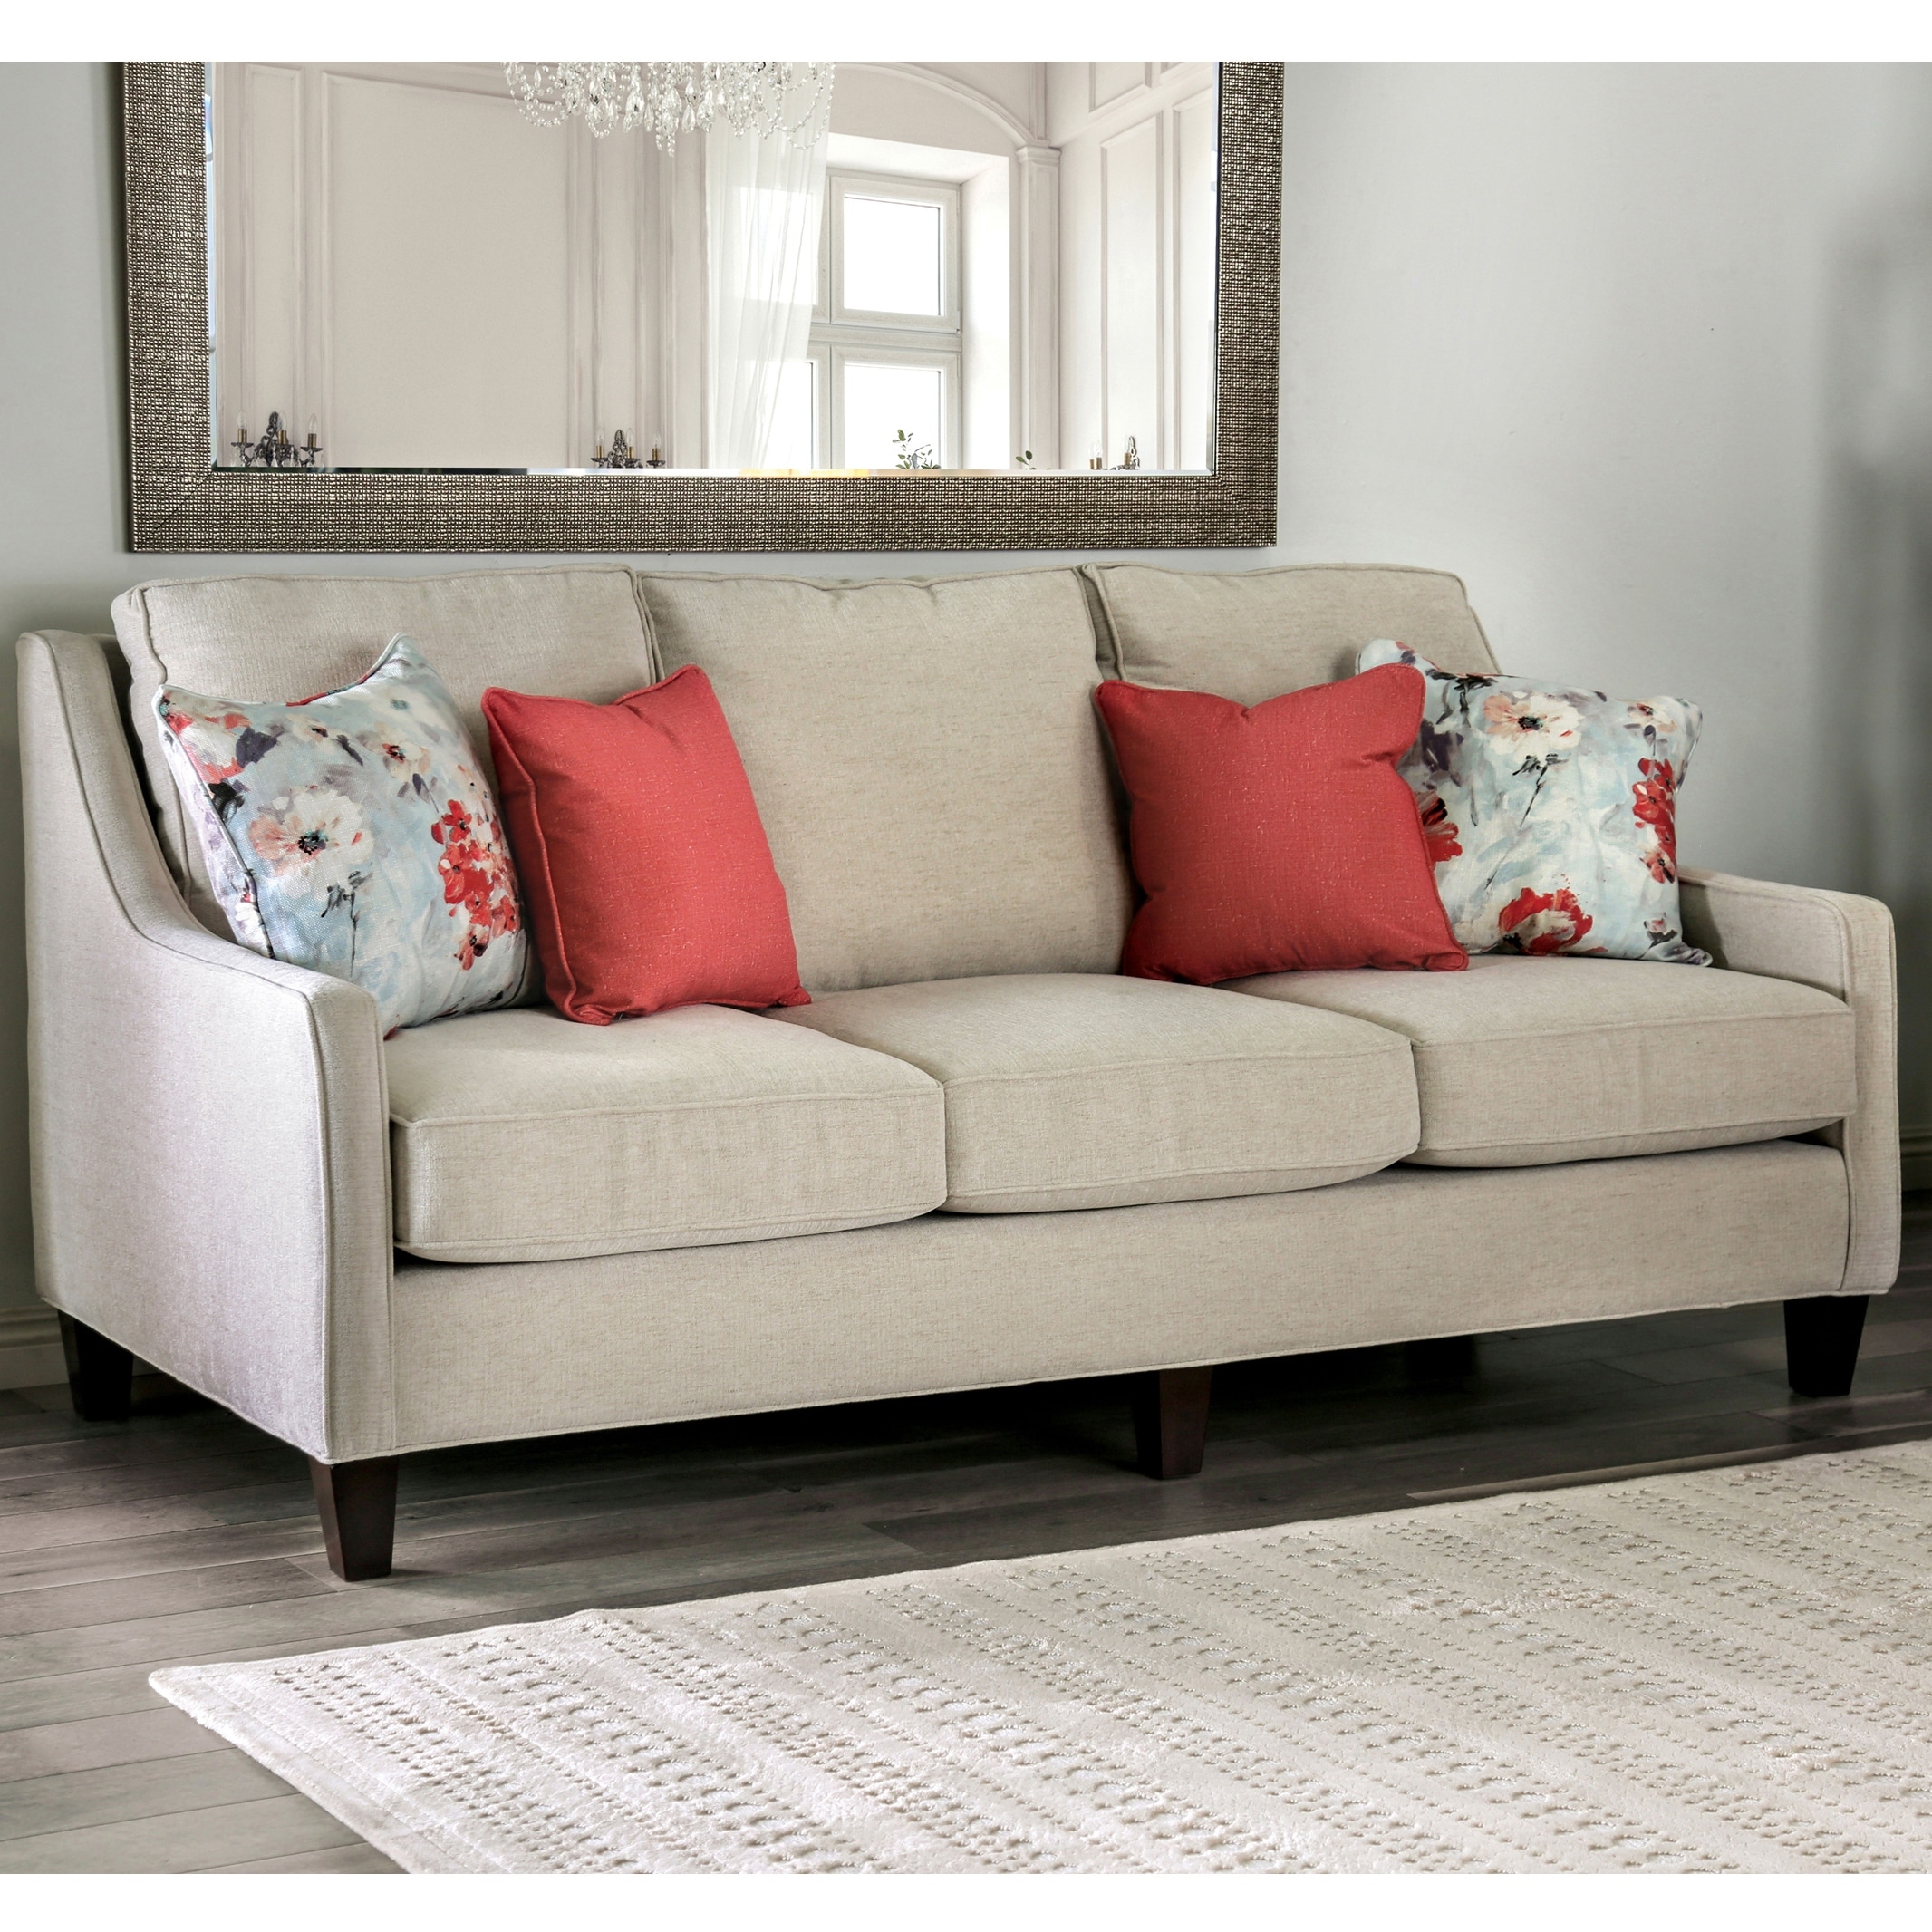 https://ak1.ostkcdn.com/images/products/is/images/direct/74f47151978fff1d518bf131d8c9cae8c4ab4f6a/Isadore-Transitional-Ivory-Sofa-by-FOA.jpg